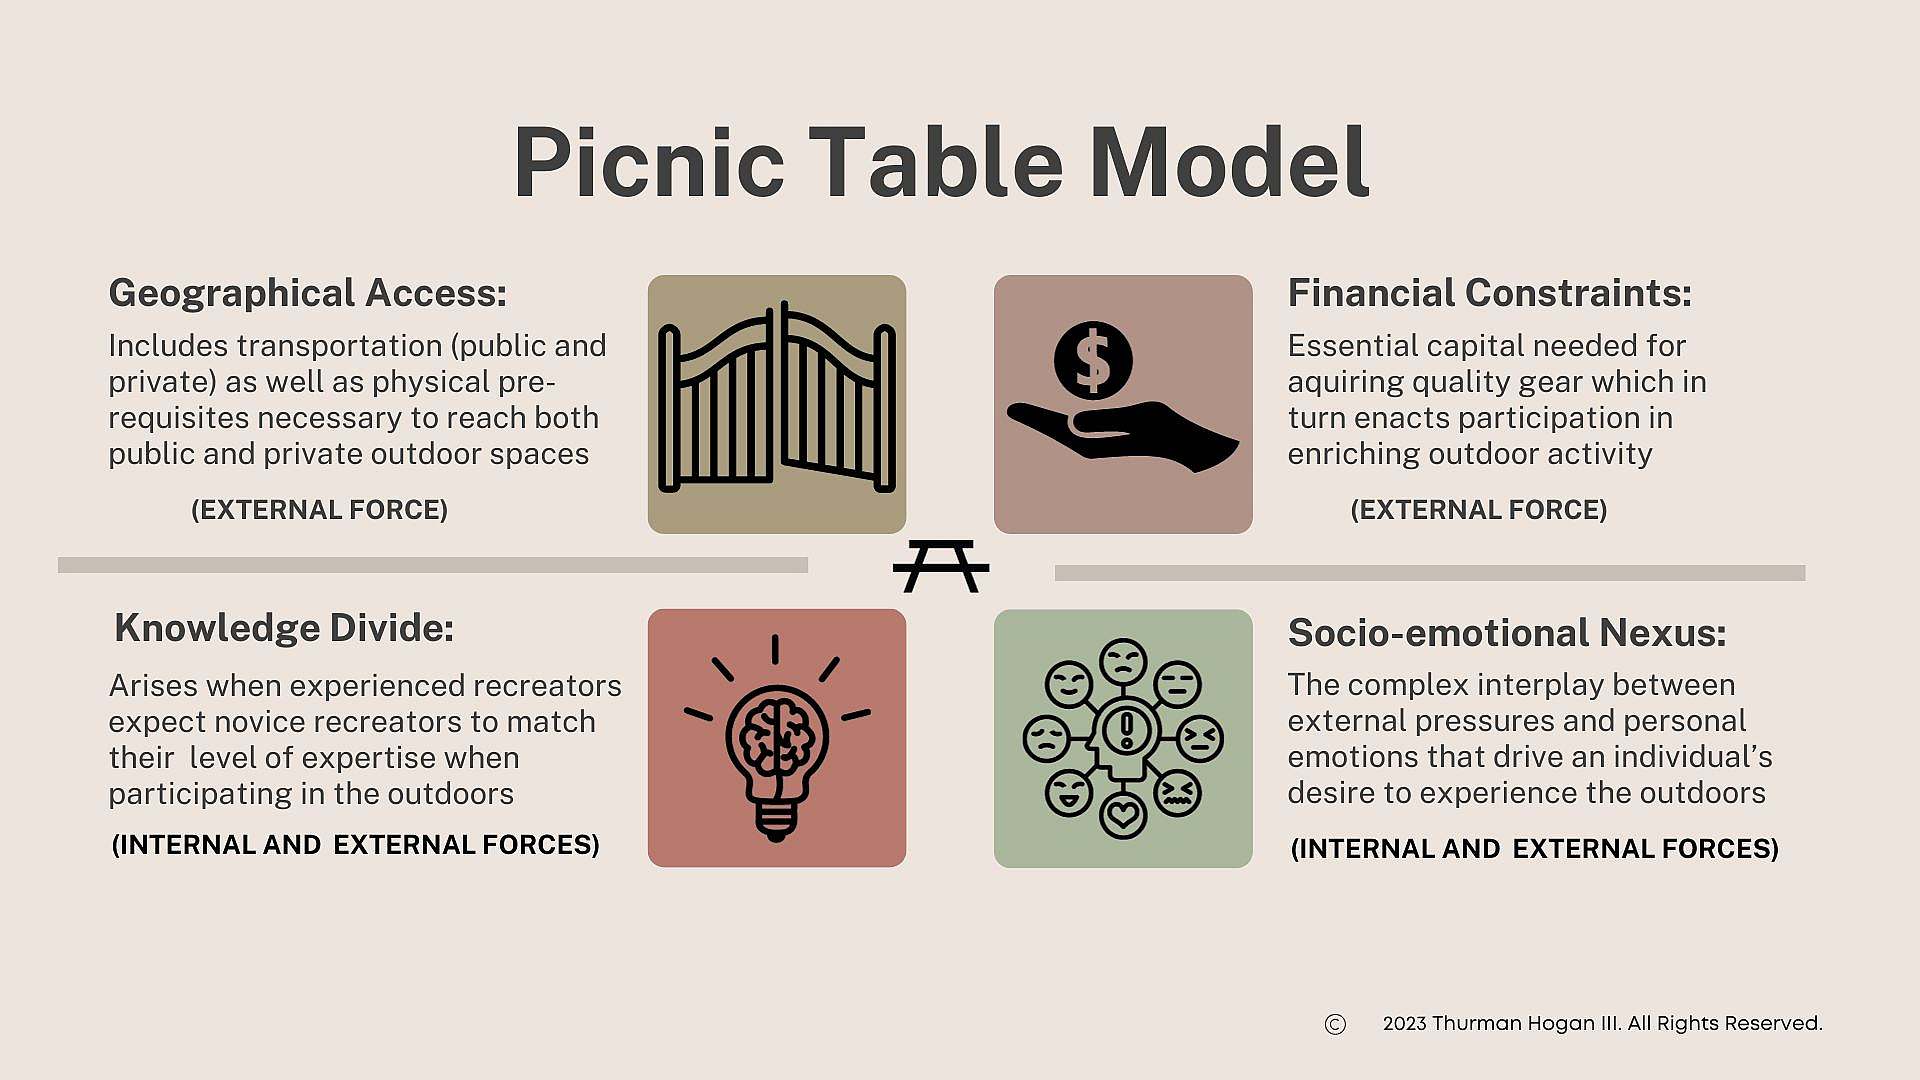 I named this model the Picnic Table Model because picnic tables play a vital part in the outdoor experience but get often overlooked. They serve as a place of fellowship, rest and refuge, and lasting memories. A barrier free outdoor experience allows picnic tables to be the beacon they are.